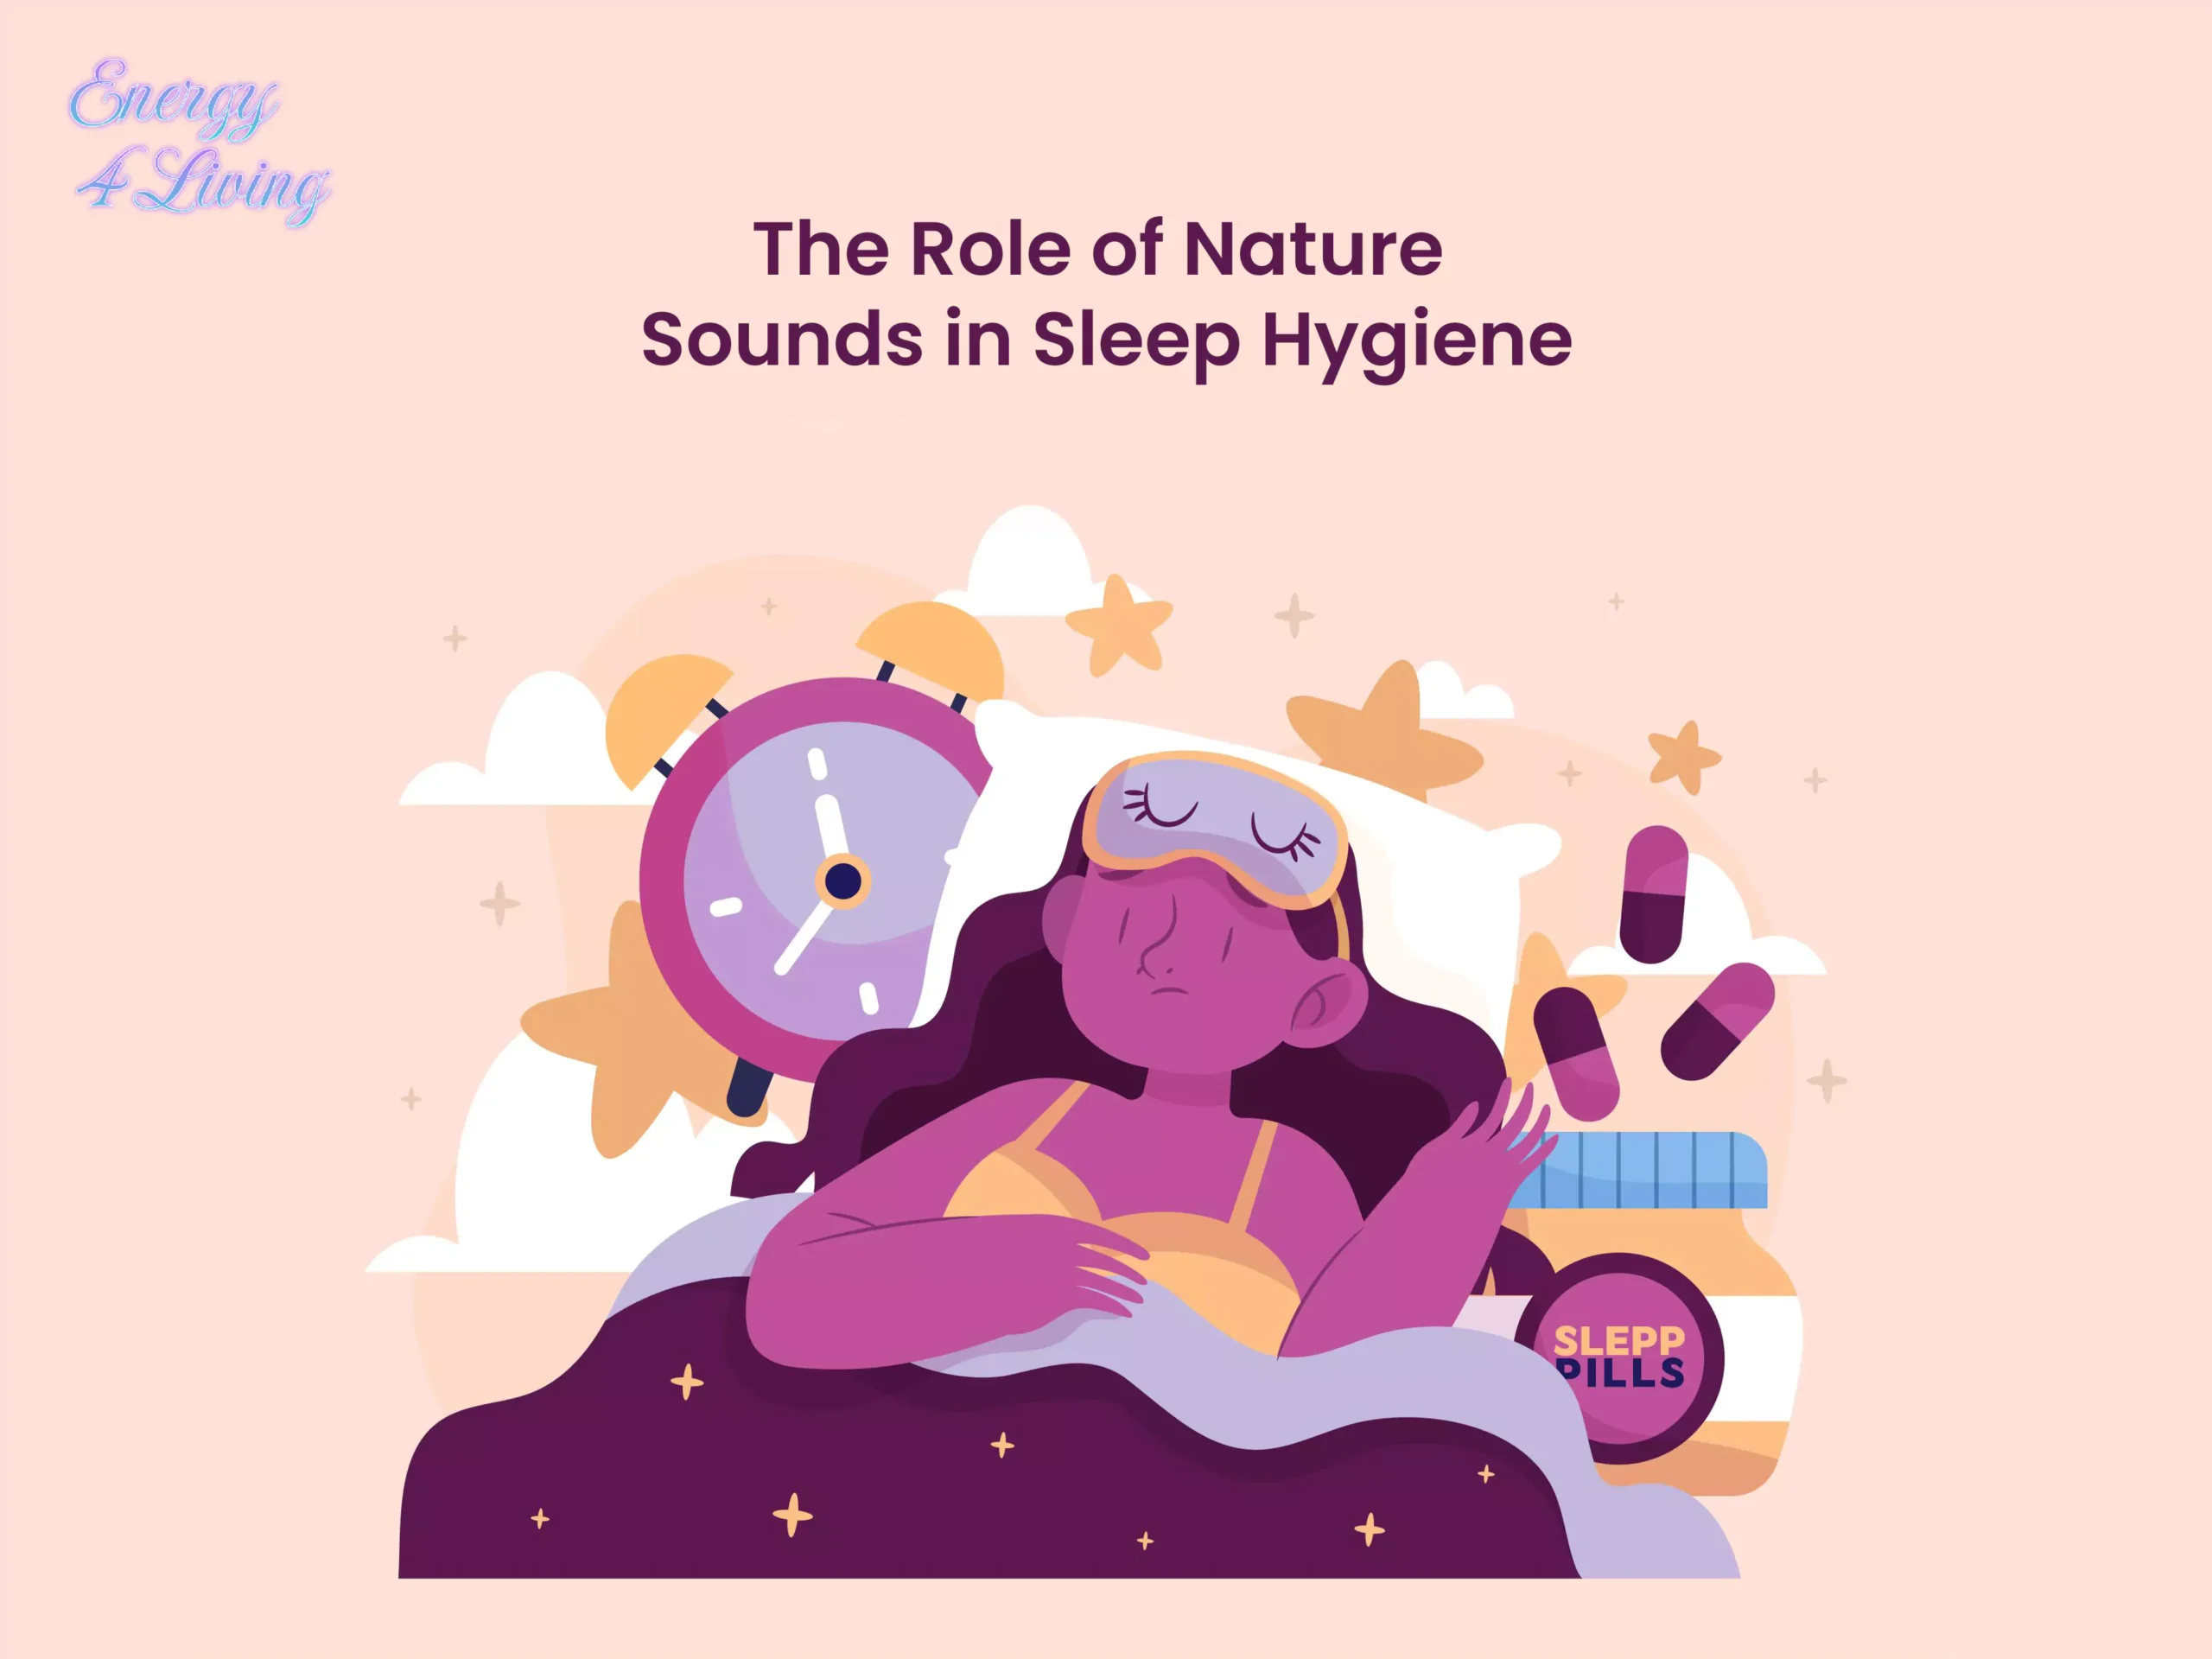 The Role of Nature Sounds in Sleep Hygiene